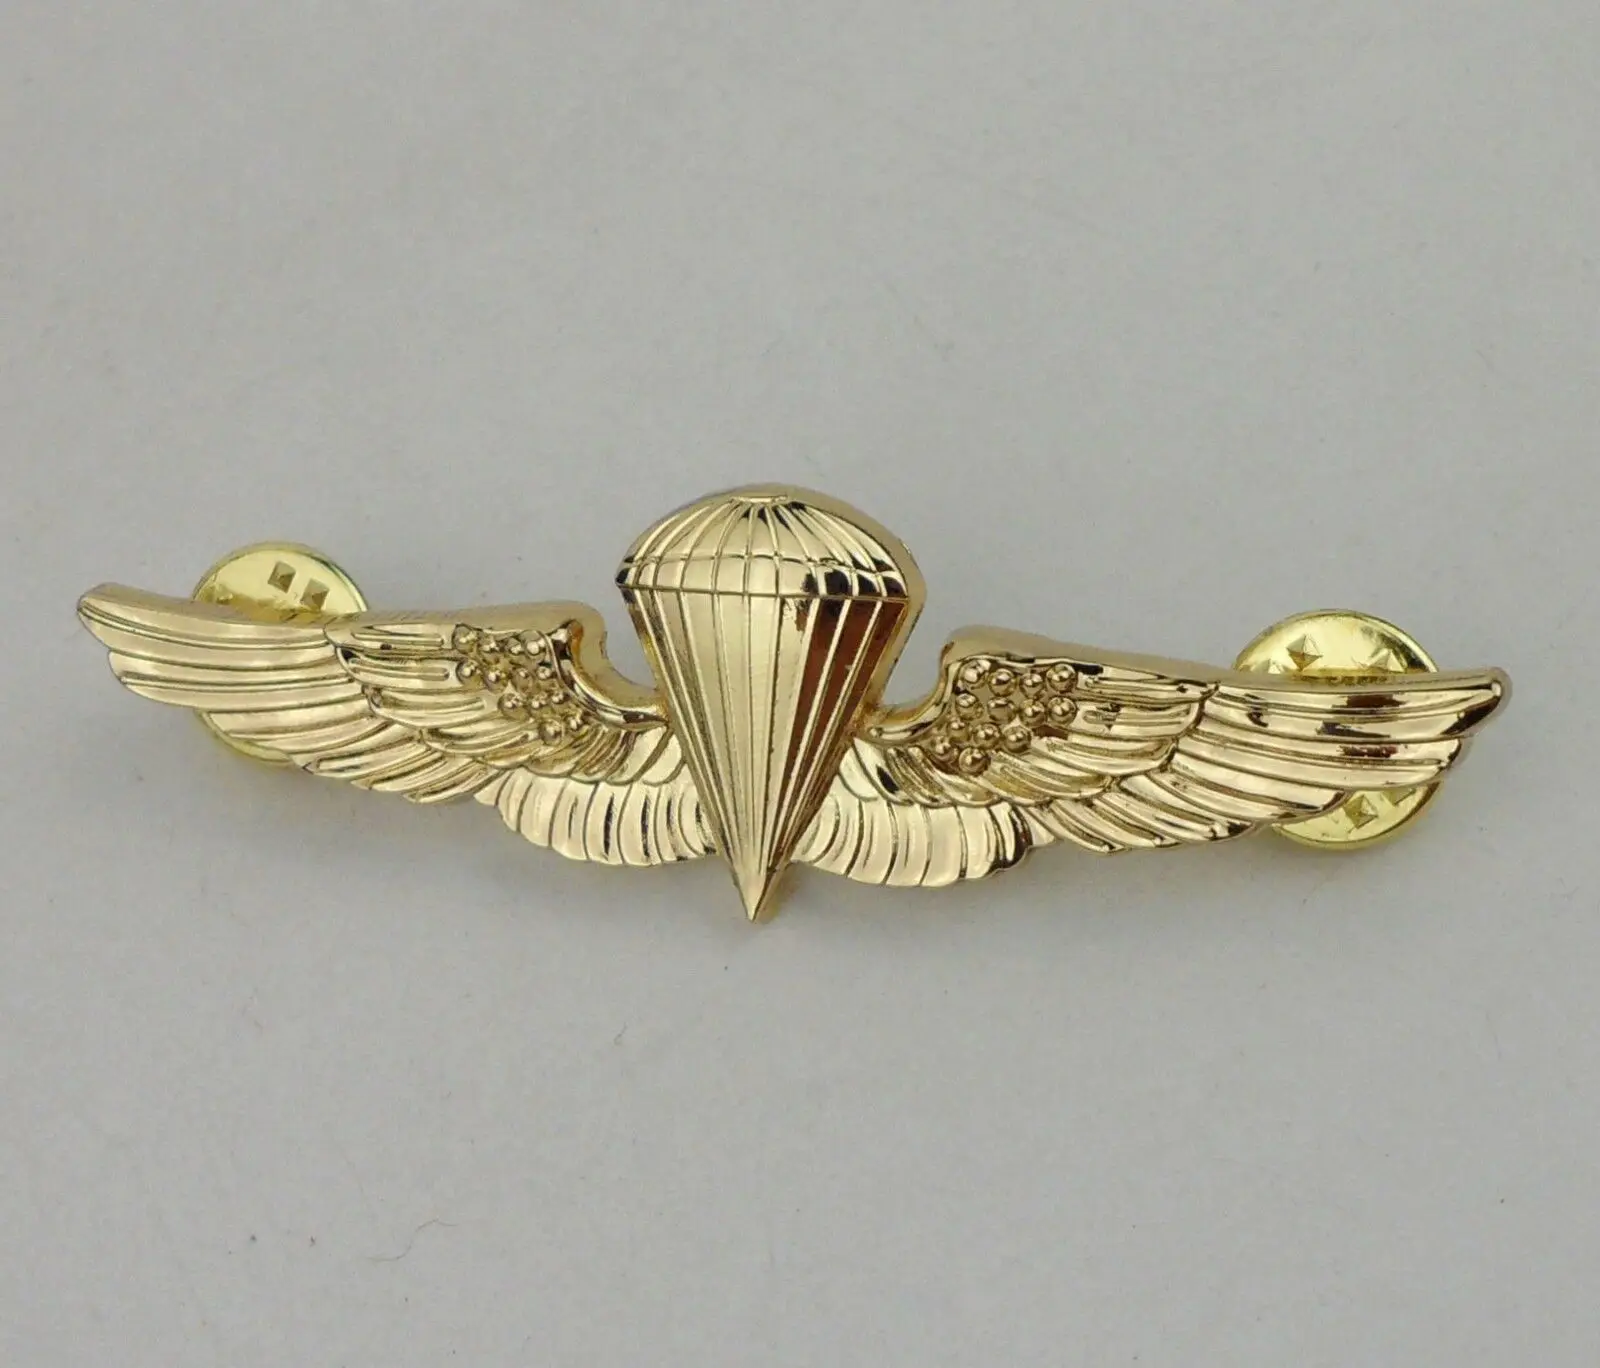 Details about   Navy Airborne Jump Wing Badge USN Pin Military Hat Cap Leap Frogs Naval Insignia 